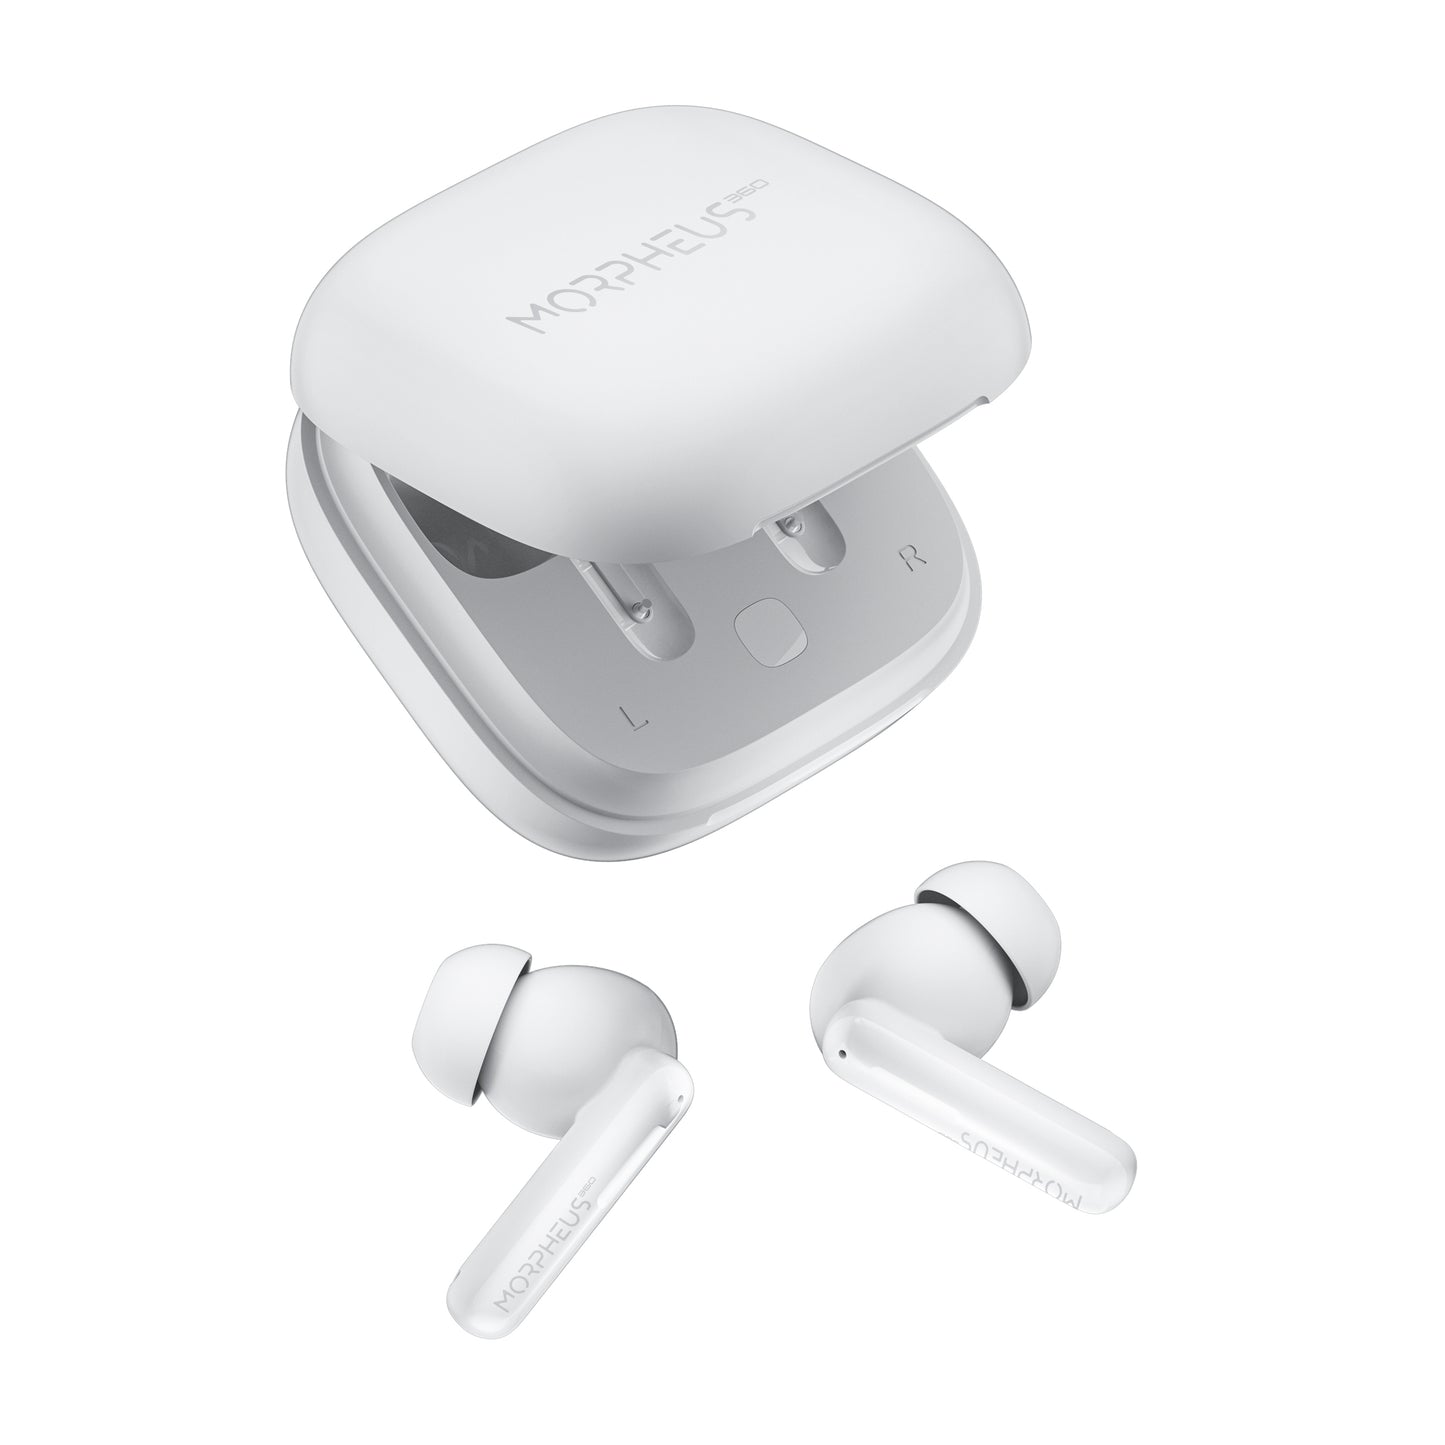 Photo of Morpheus 360 Nemesis ANC True Wireless Earbuds, White left and right stick earbuds with white charging case